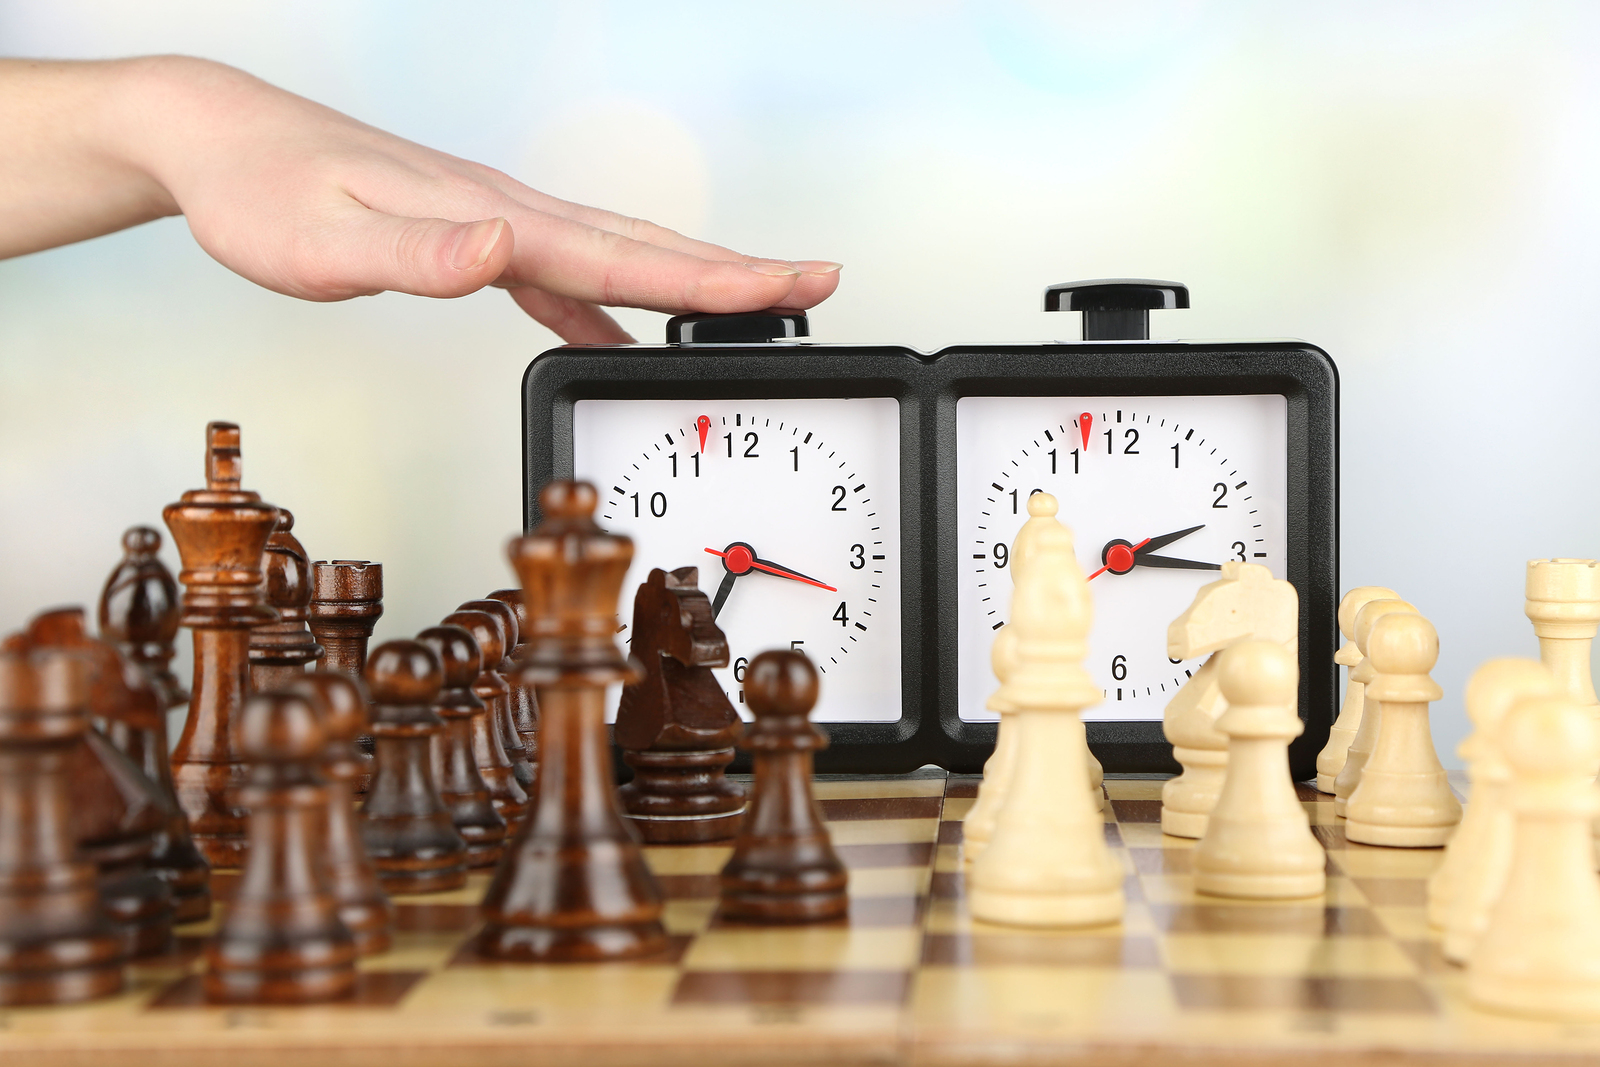 Grown men play chess using a watch to control time